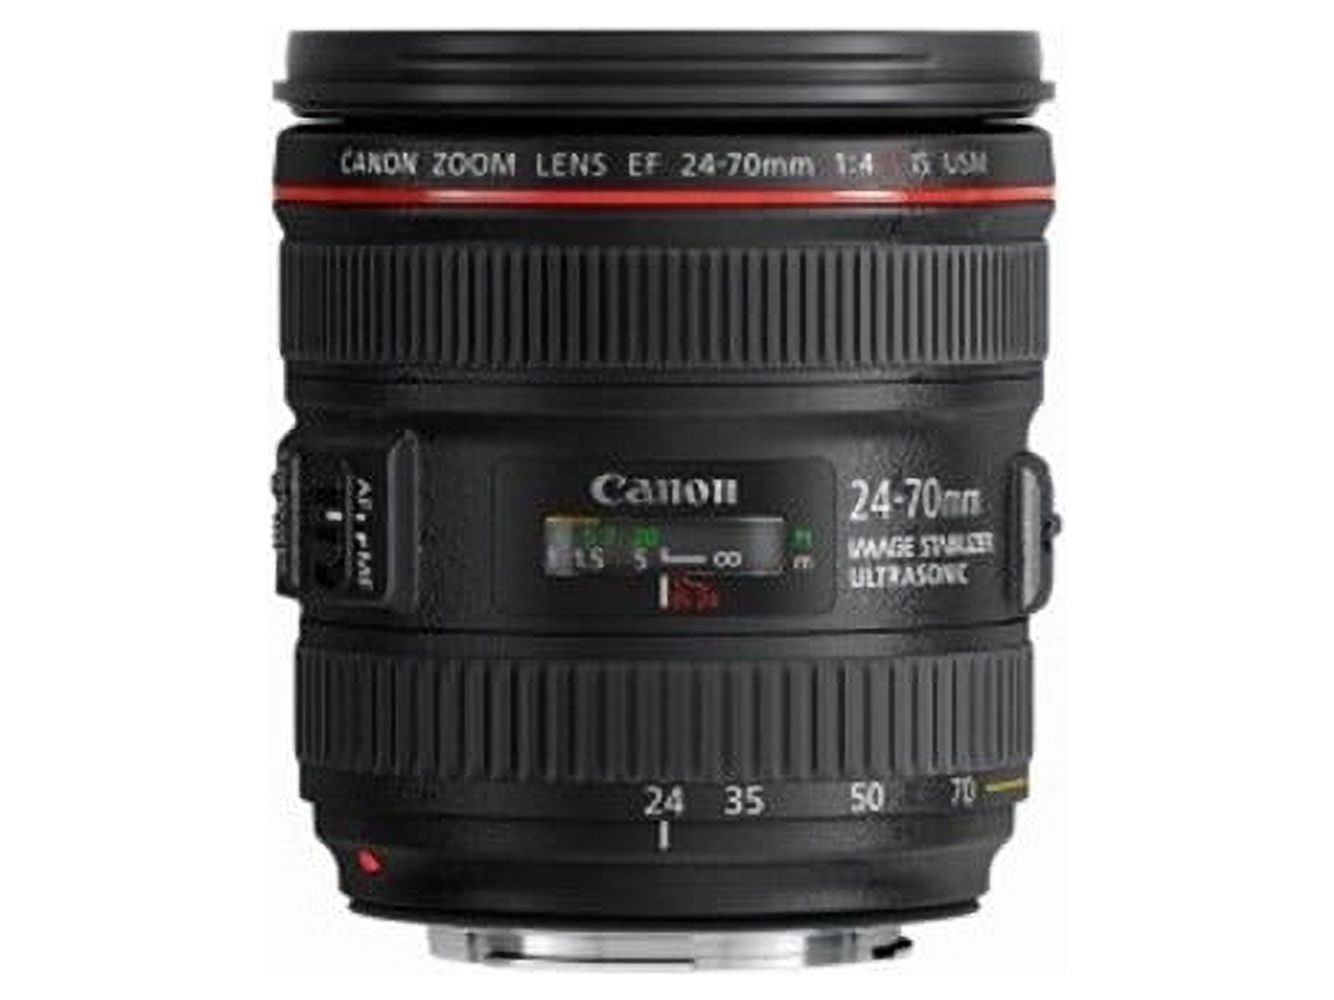 Canon EF 24-70mm f/4L IS USM Standard Zoom Lens for Canon EOS 6313B002 - image 1 of 7